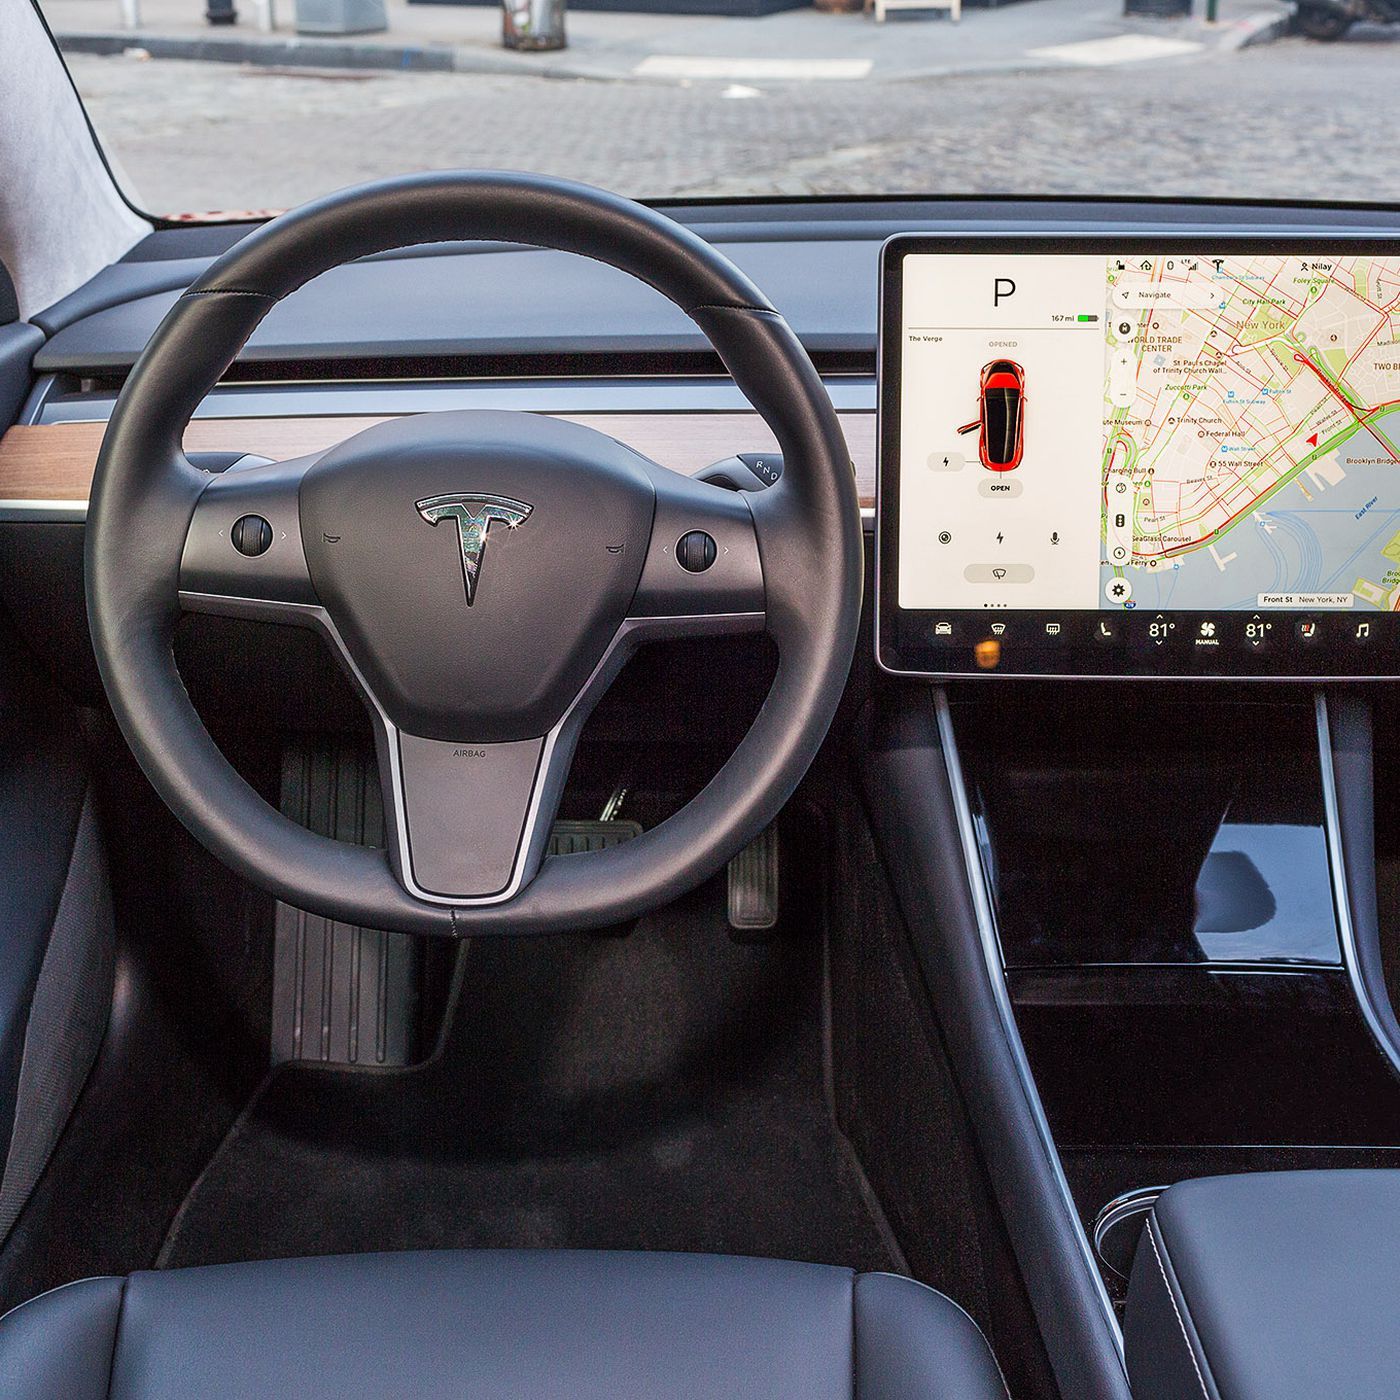 Tesla's Model 3 Interior Is Now Completely Leather Free, Including The Steering Wheel